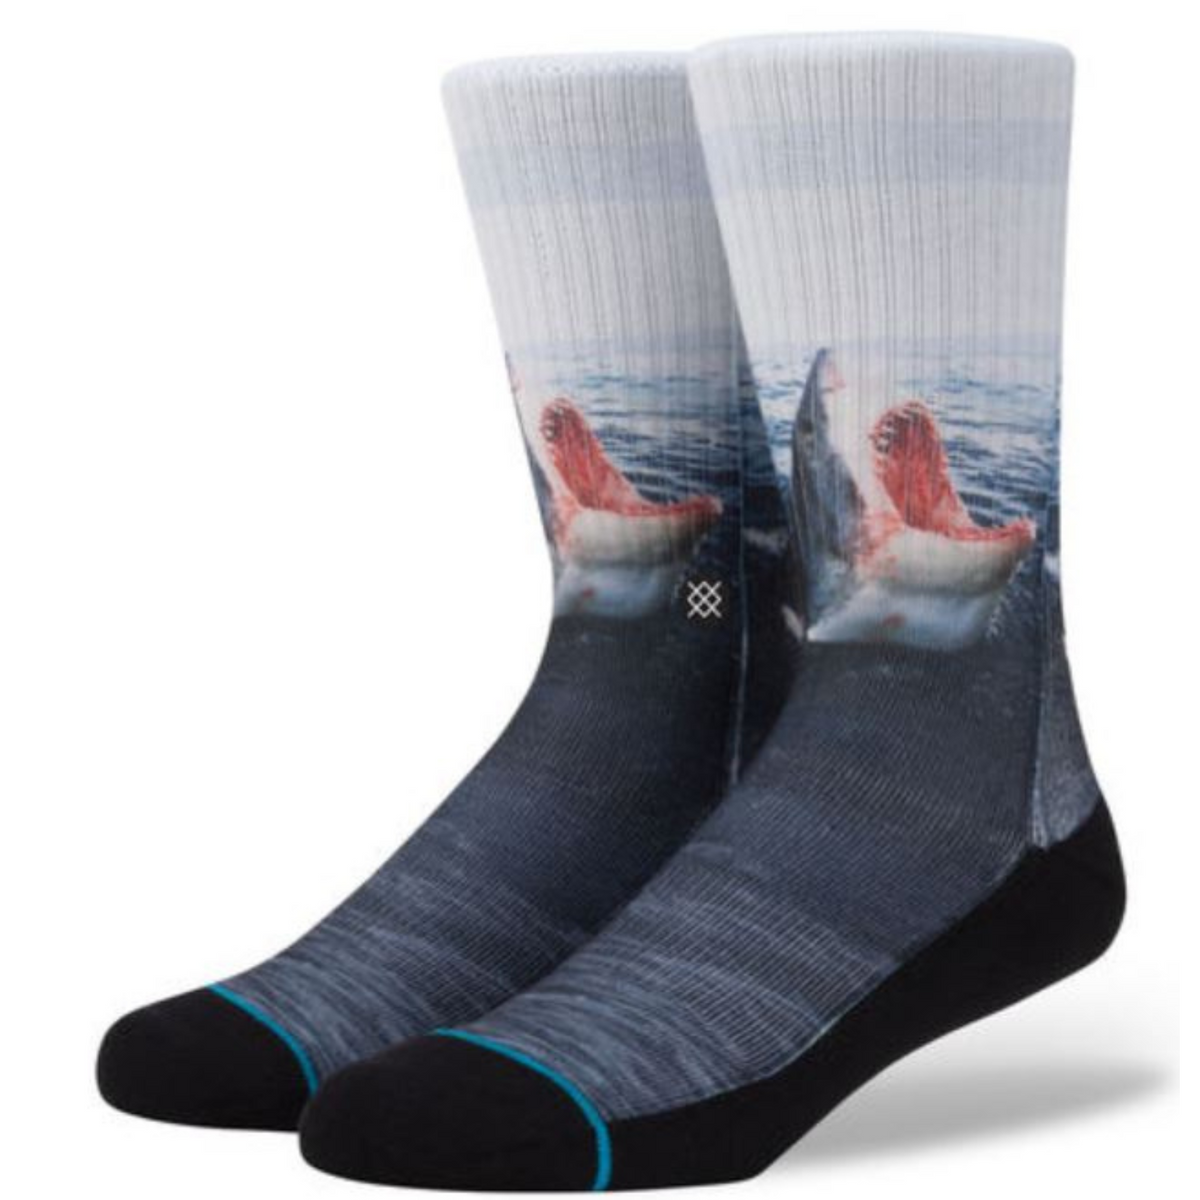 Stance Landlord men&#39;s crew sock featuring image of great white shark coming out of water with open mouth. Socks shown on display feet.